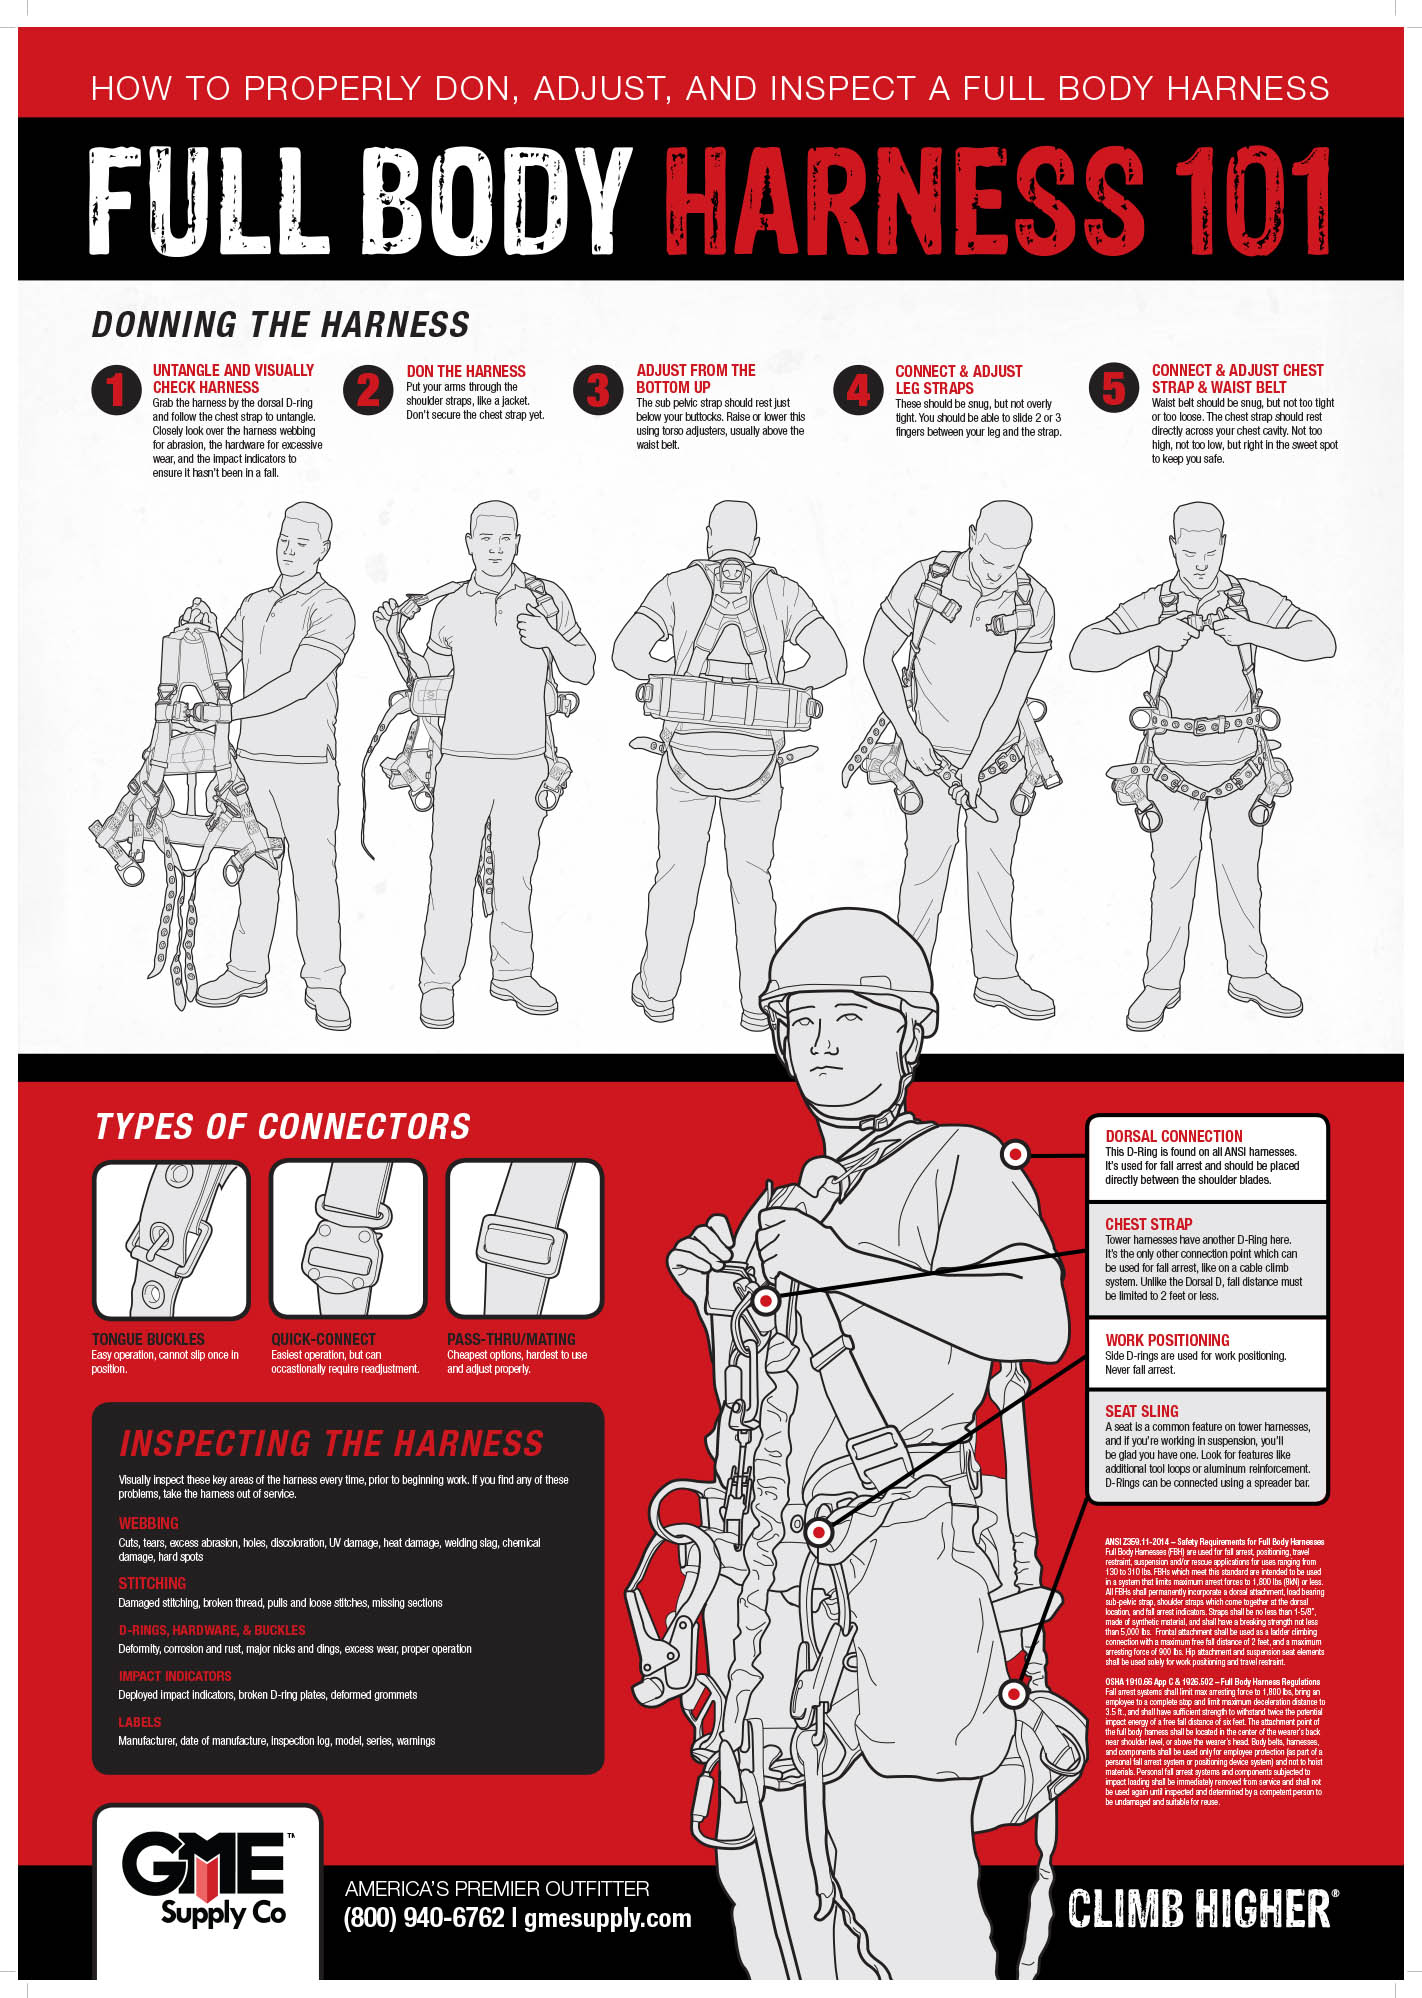 Full Body Harness 101 Safety Poster from Columbia Safety